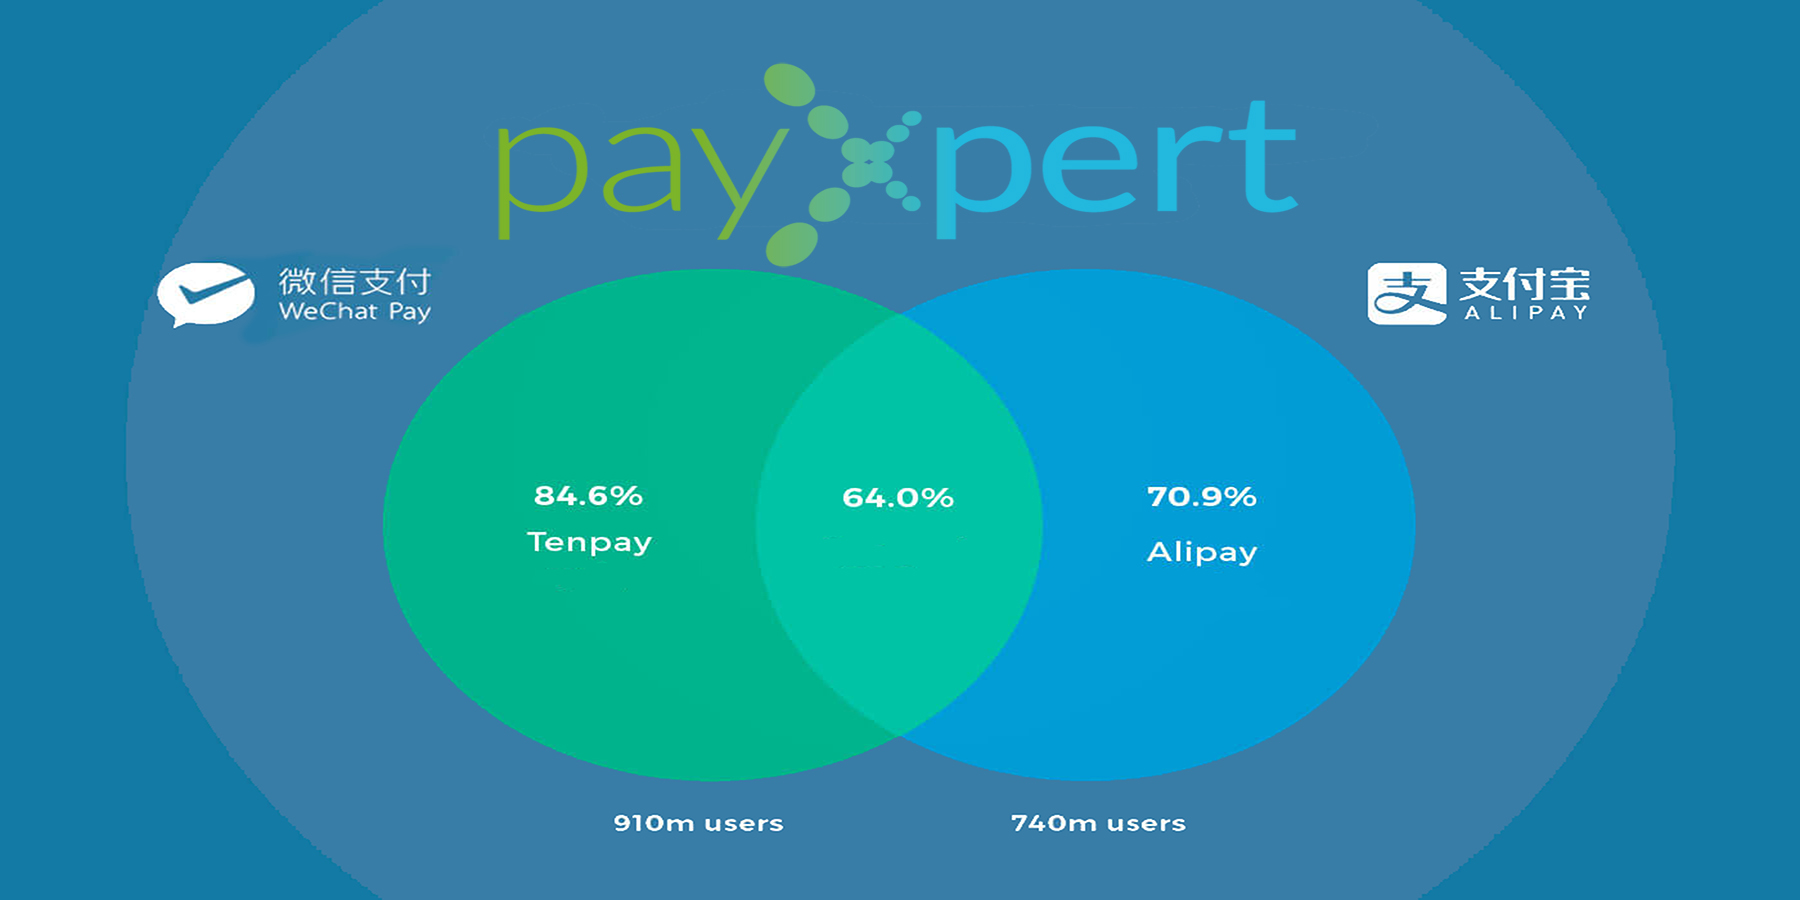 Alipay Overtakes PayPal As the Largest Mobile Payments Platform in the World